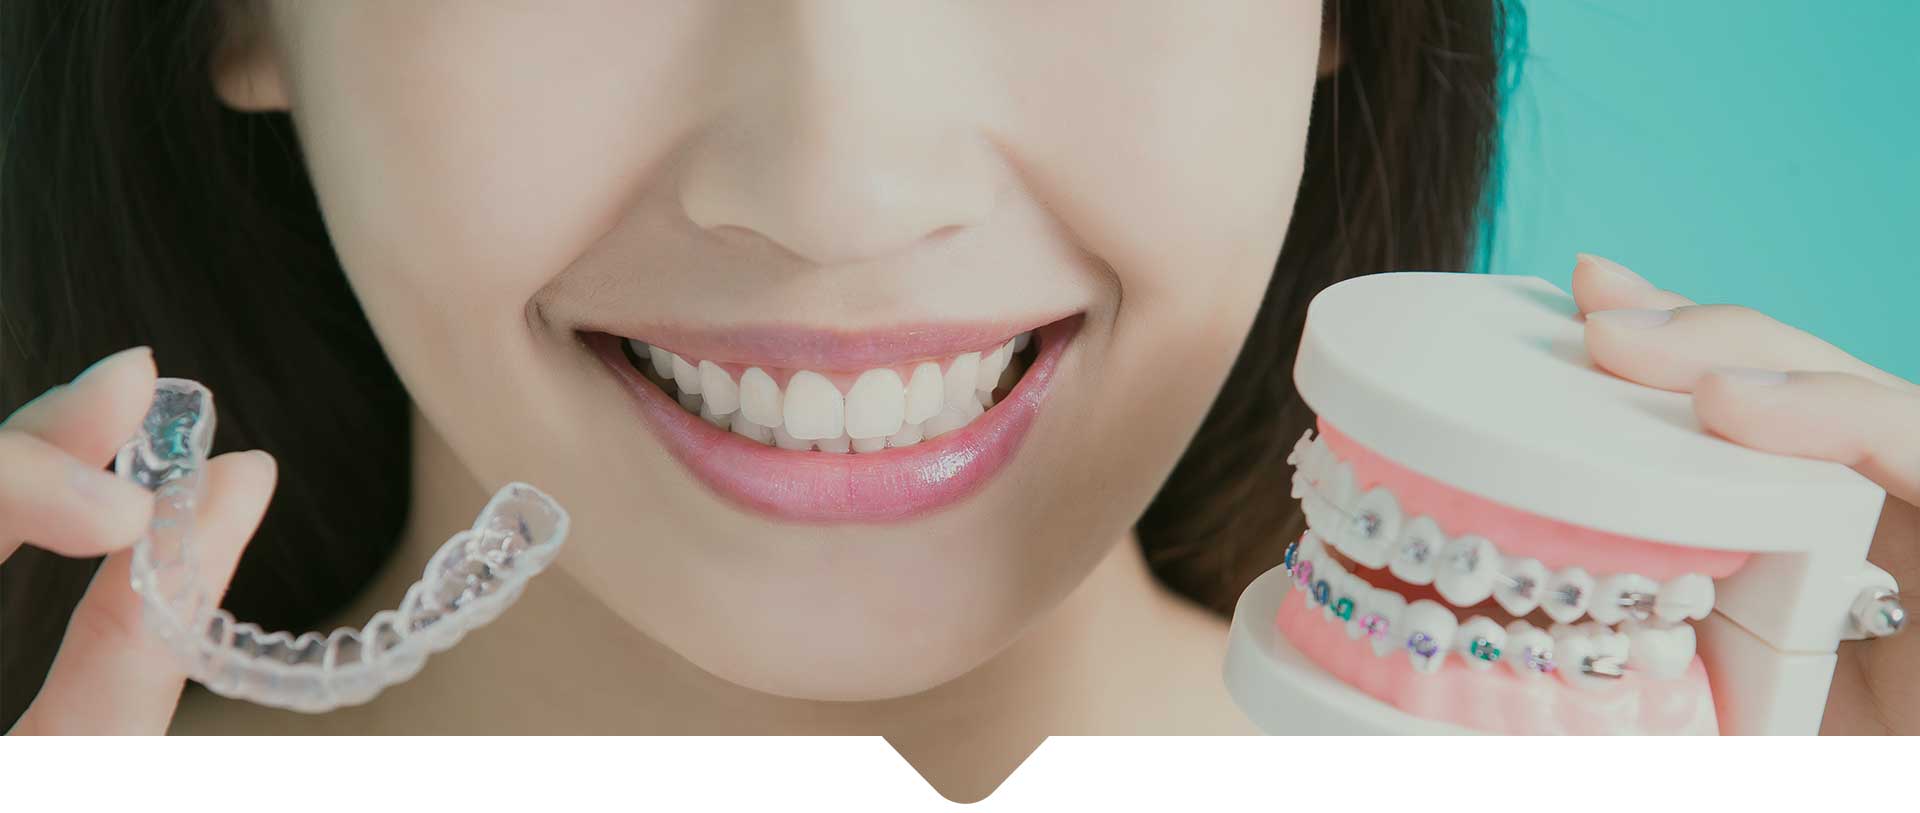 A smiling woman holding Invisalign and teeth braces towards the camera